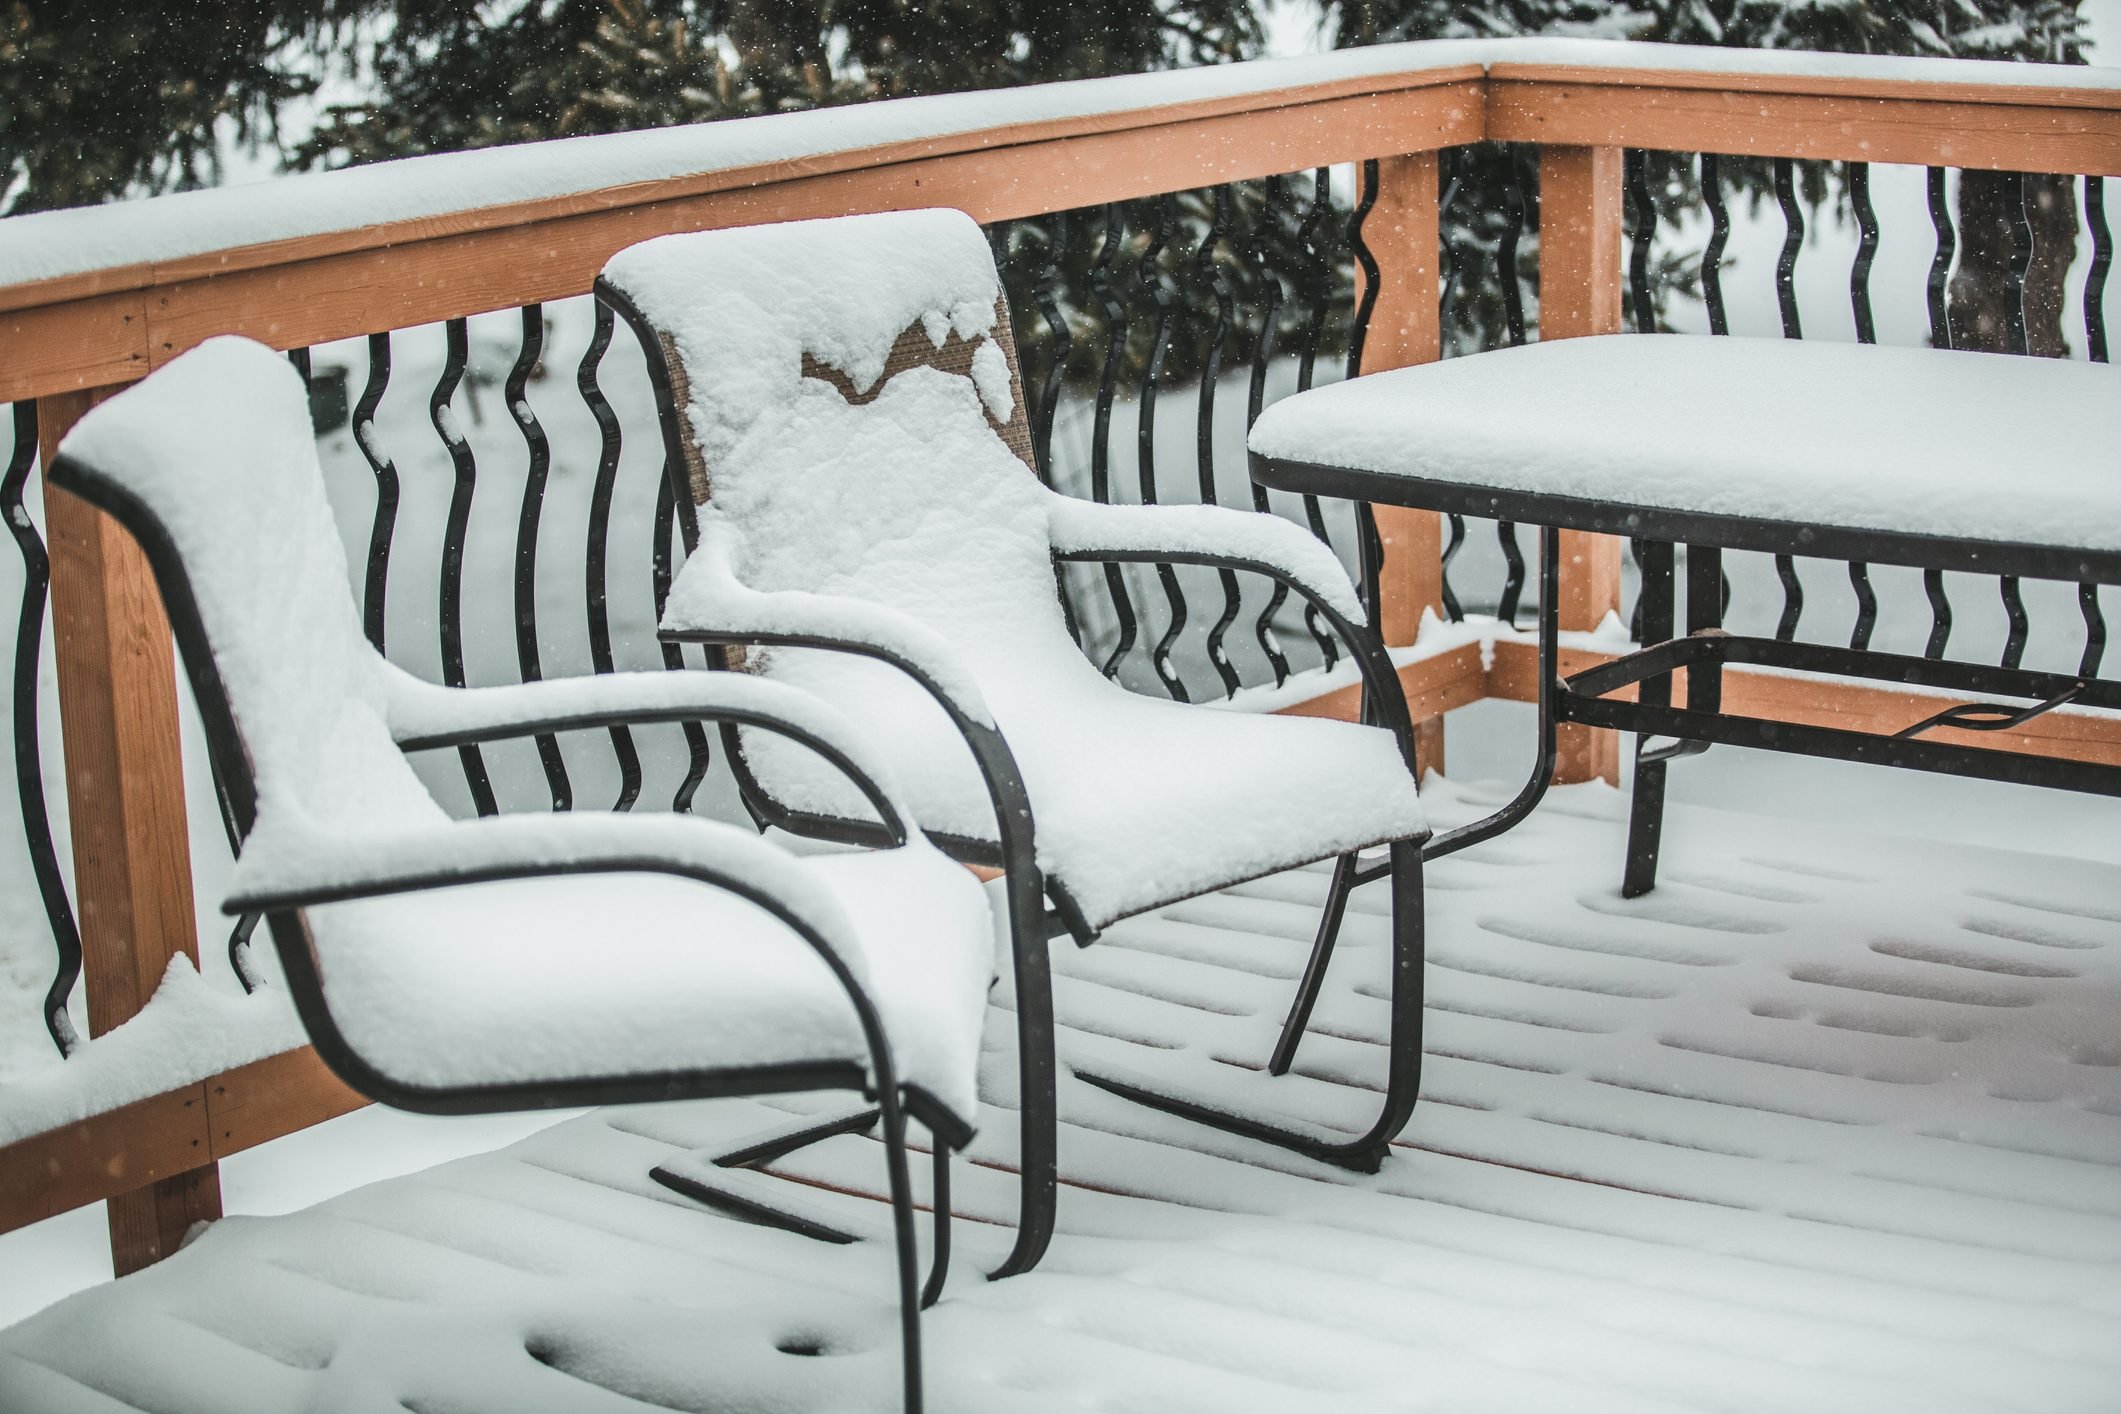 Can You Leave Snow on the Deck? The Answer, According to Experts